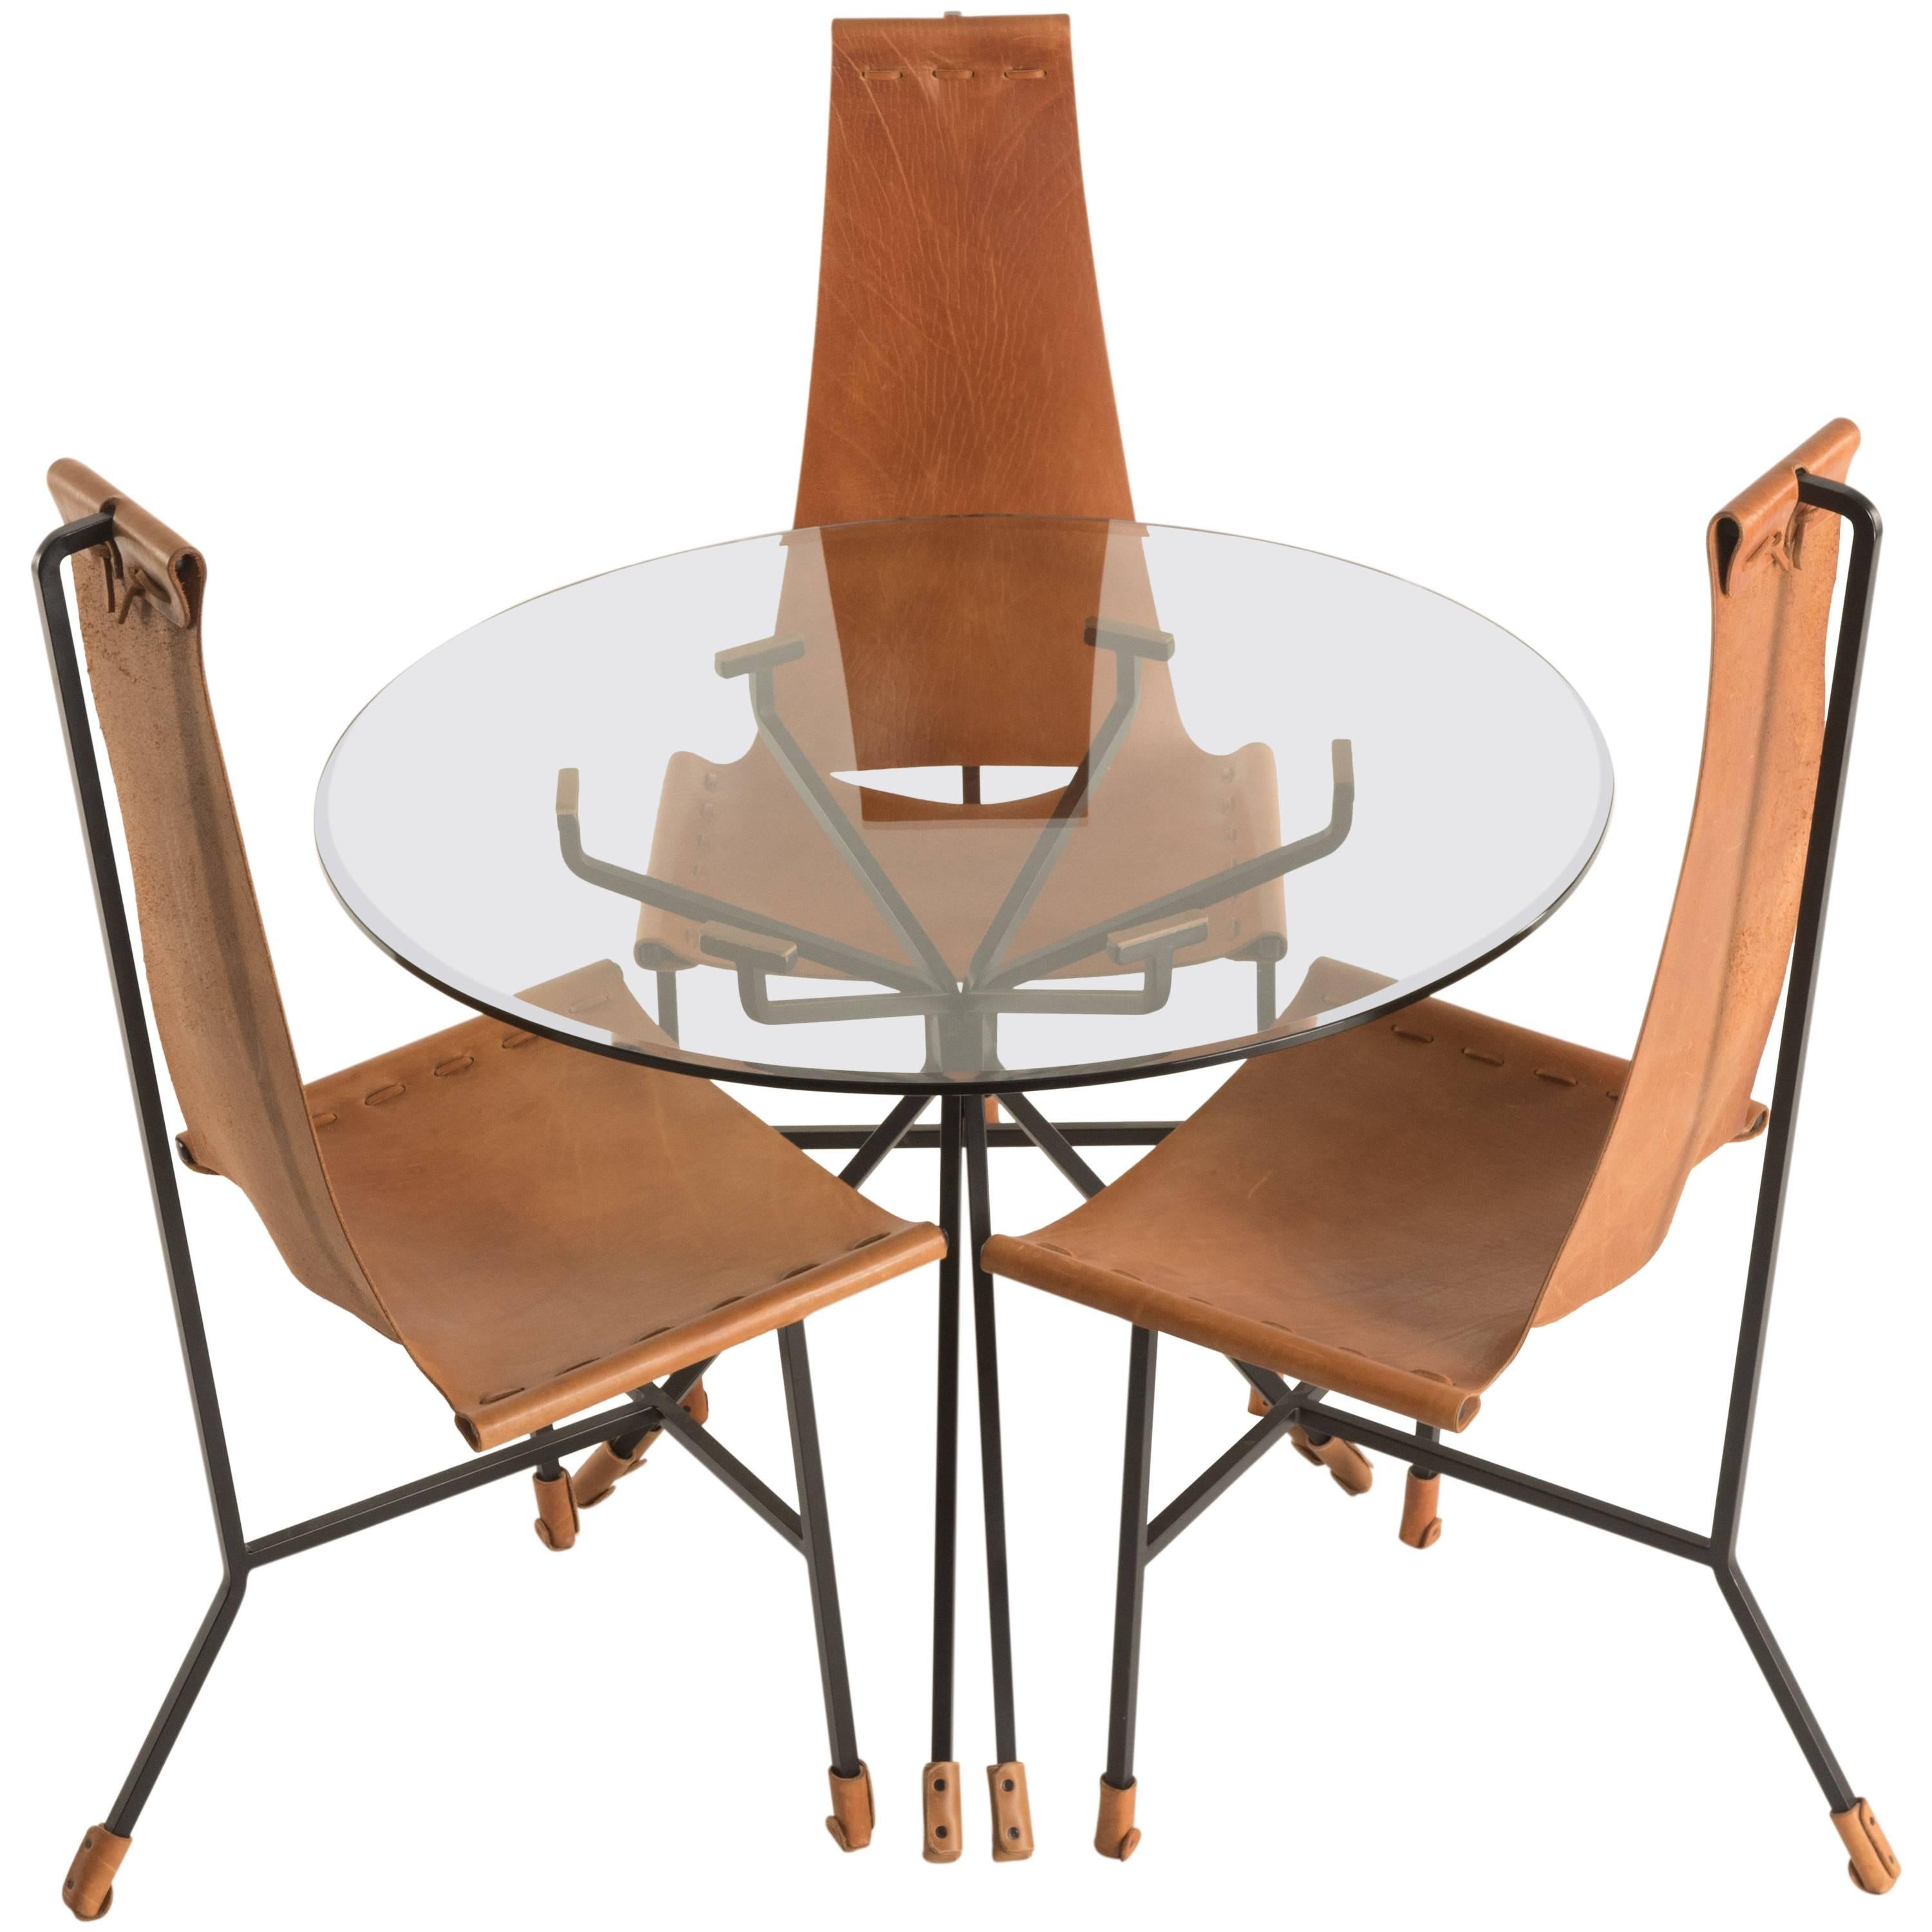 Dan Wenger Dining Set of Three Chairs and Table